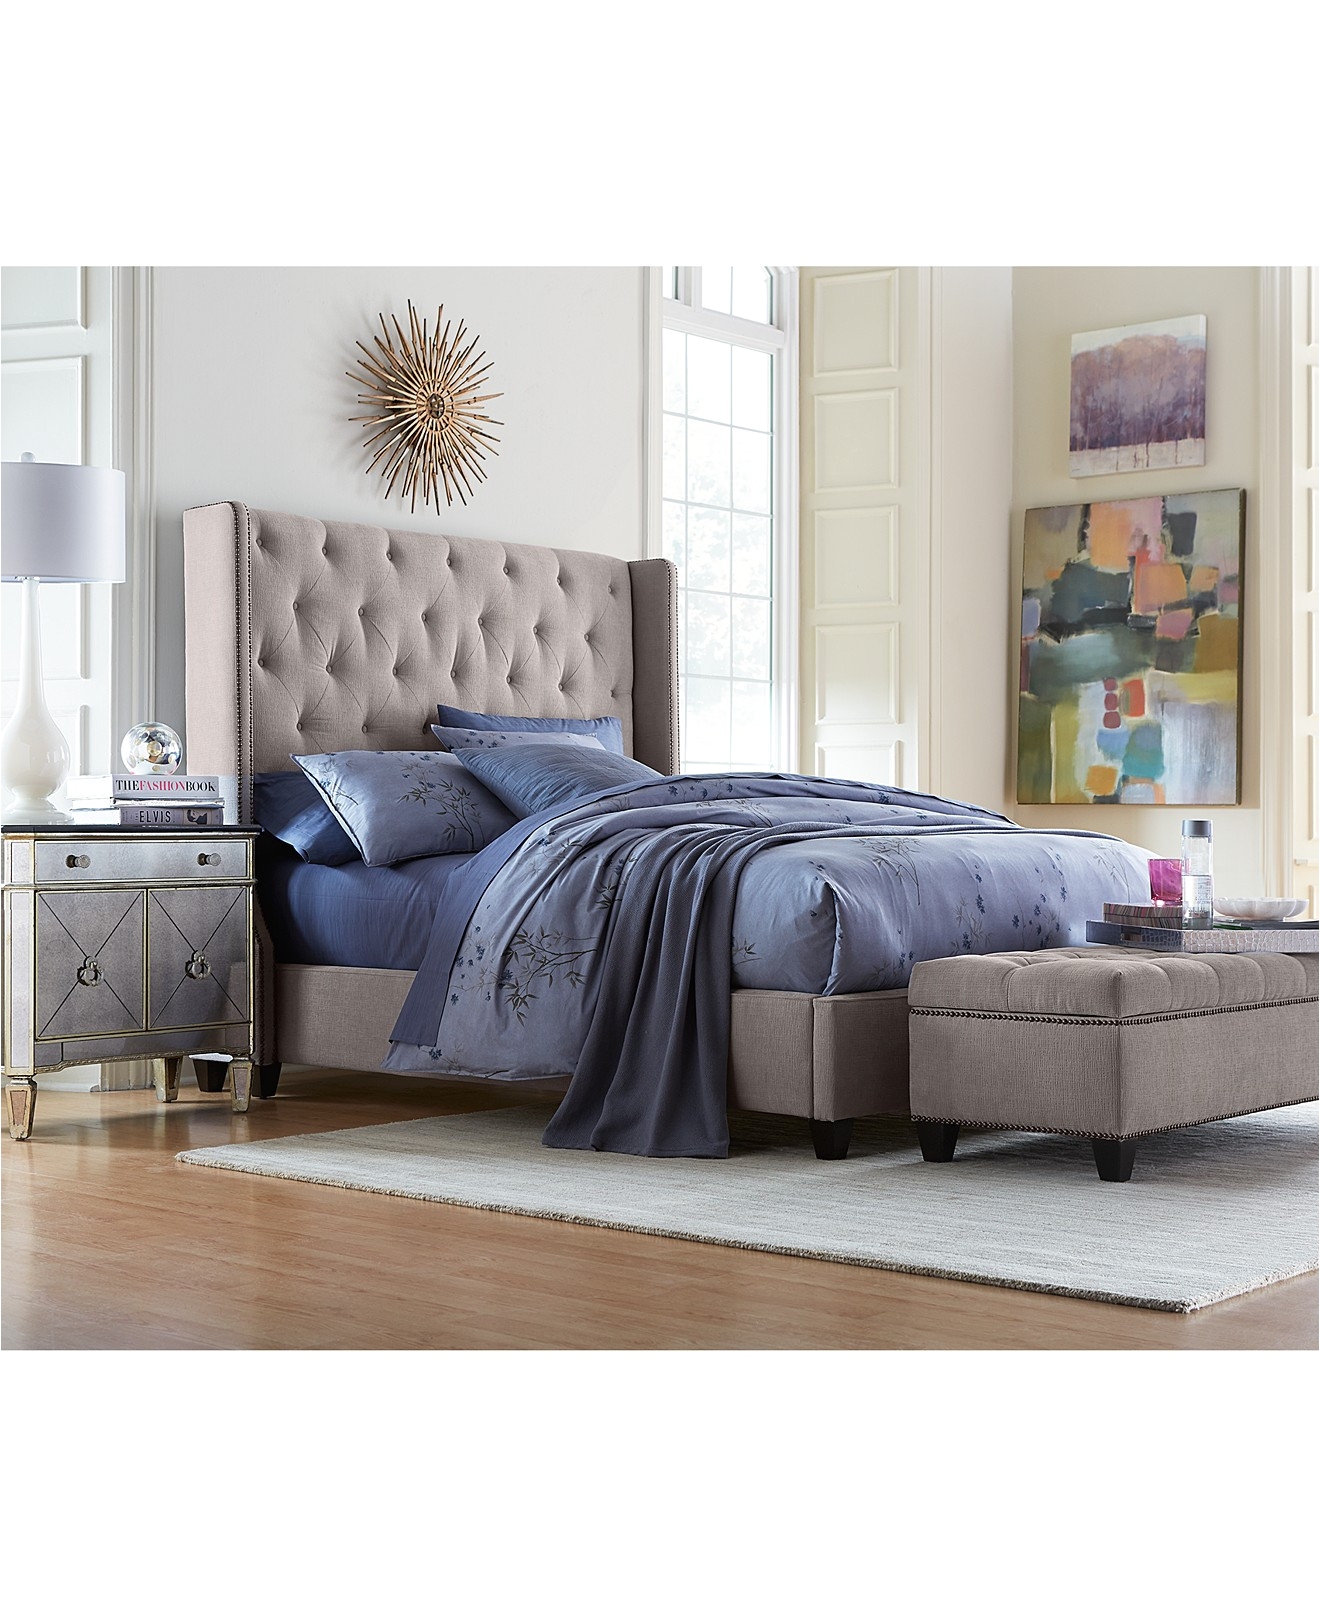 macys pillow sale new rosalind upholstered bedroom furniture collection